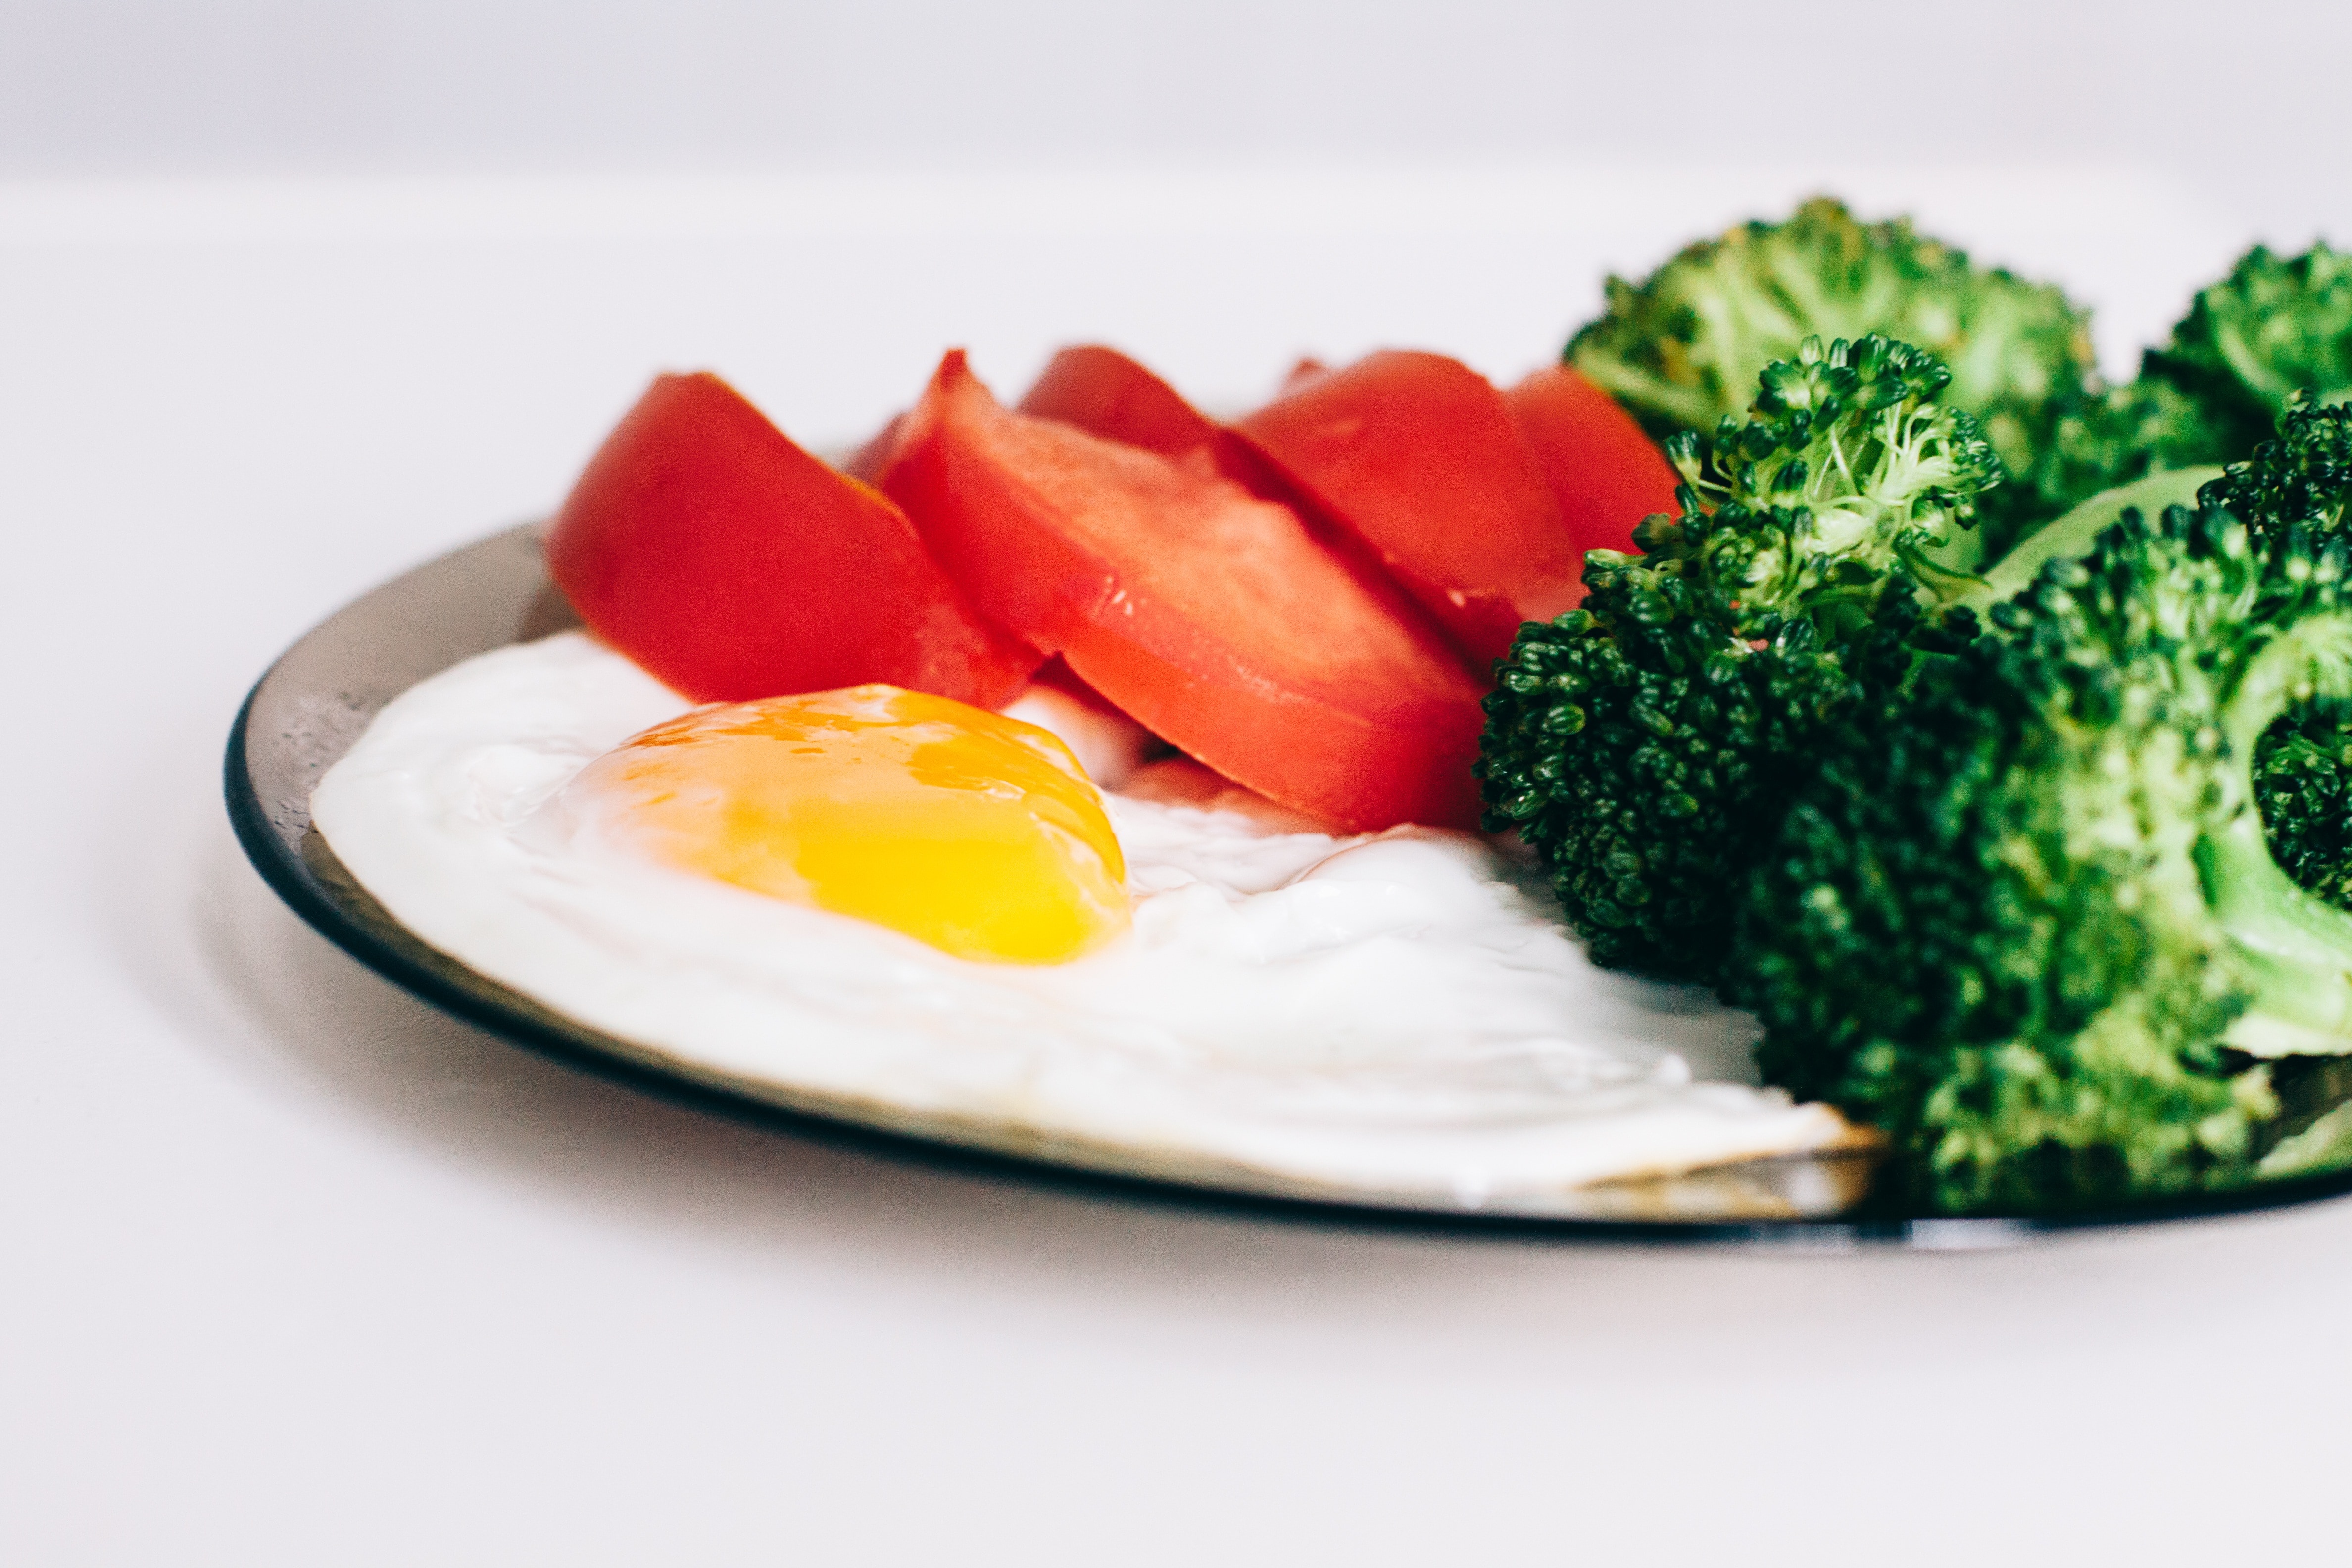 egg four slices of tomato and broccoli on glass plate